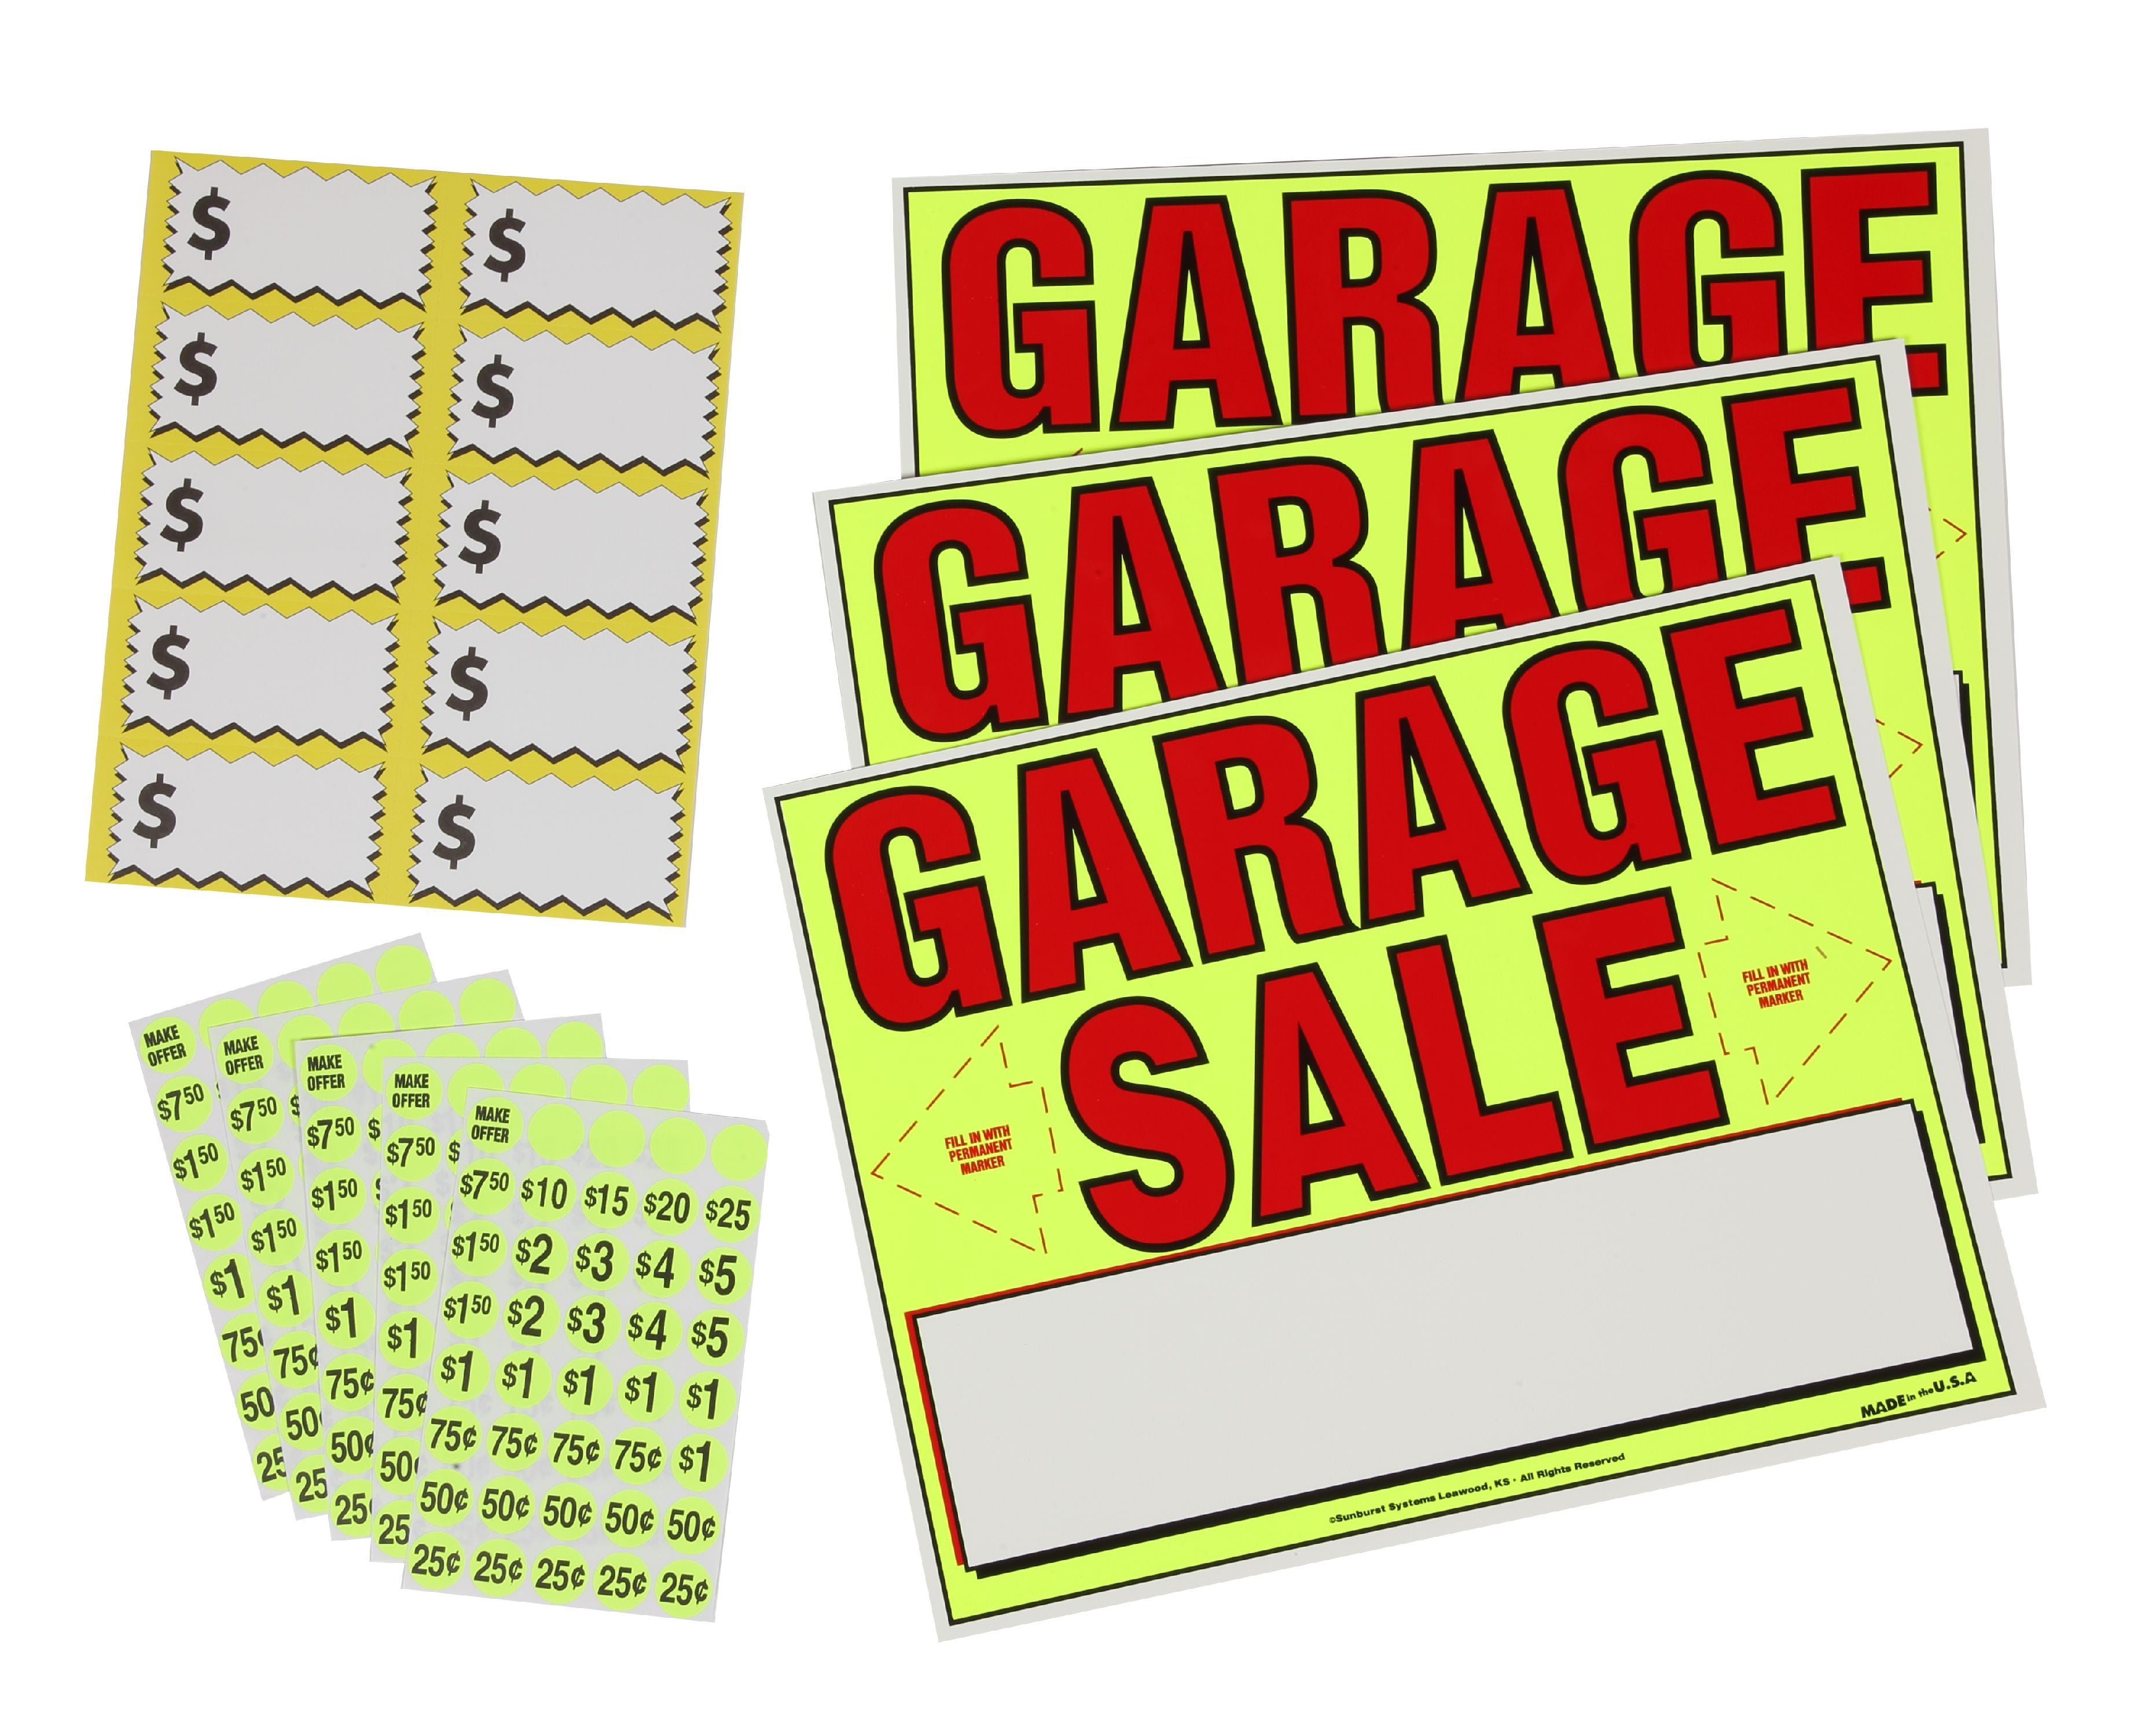 2592 Blank Garage Yard Sale Rummage Stickers Labels Price Tags 6 colors SALE!!! 